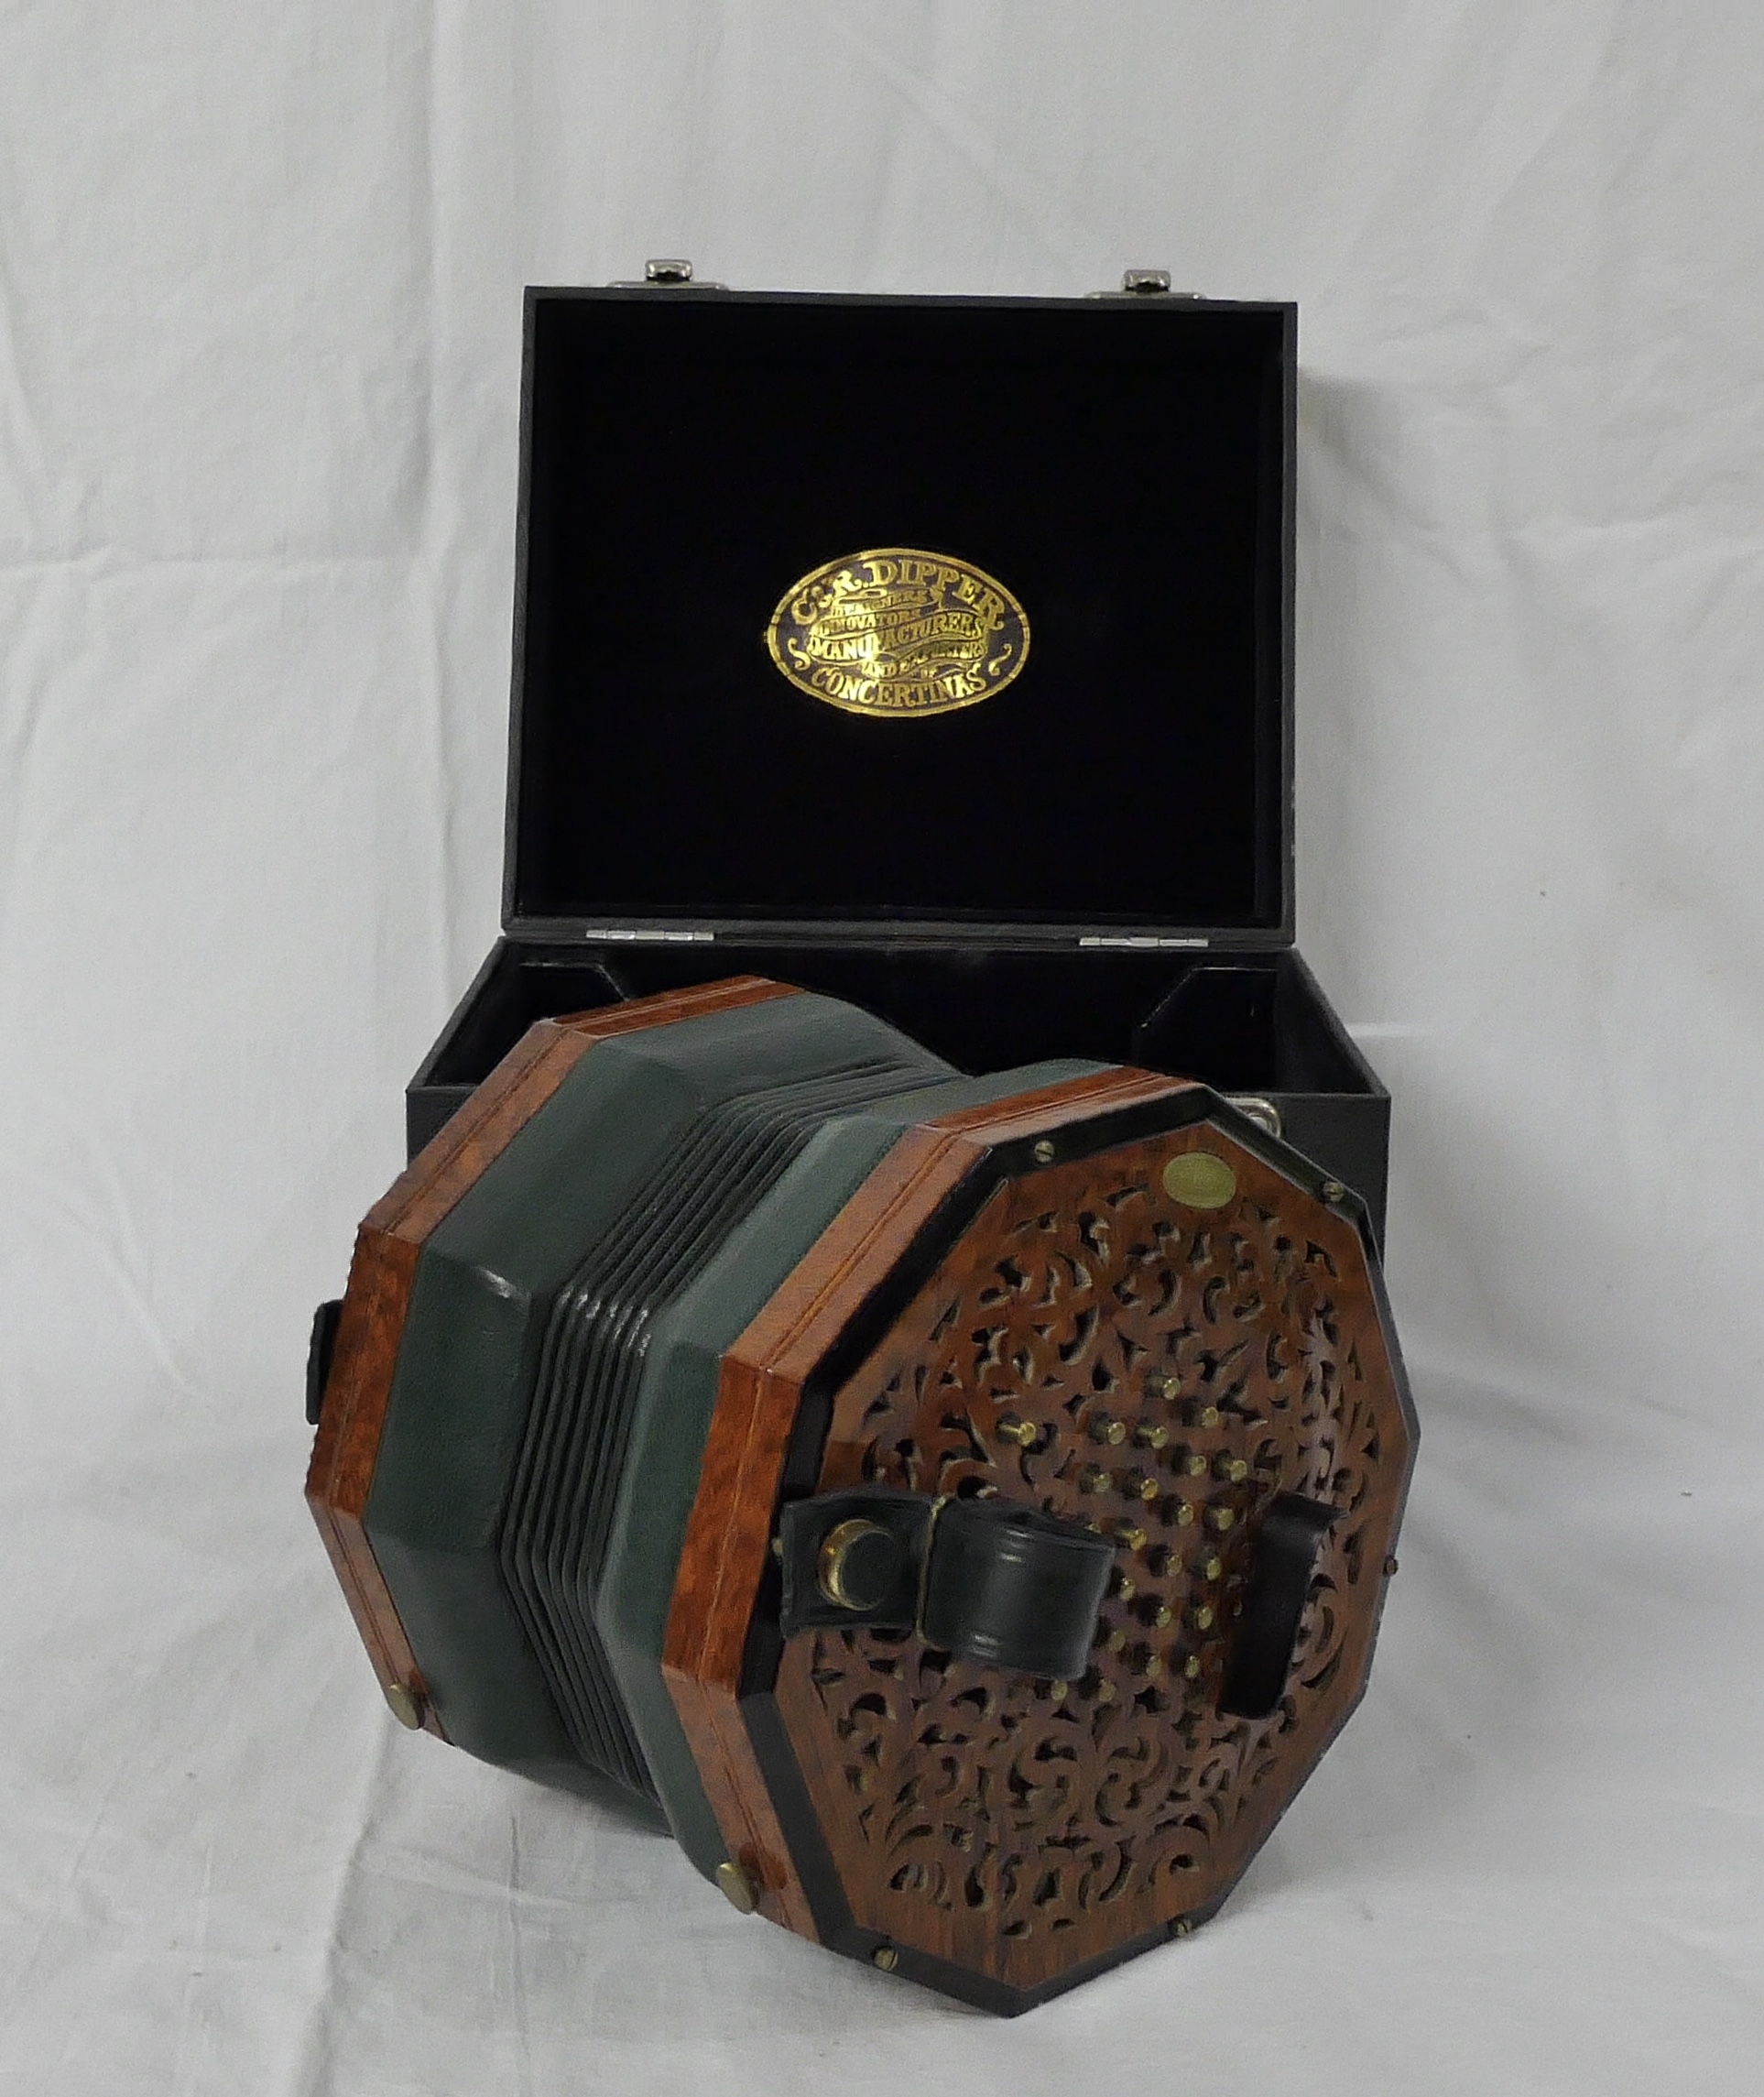 Colin Dipper forty-eight button 'English' system concertina tenor (viola range) with top note F - Image 19 of 20